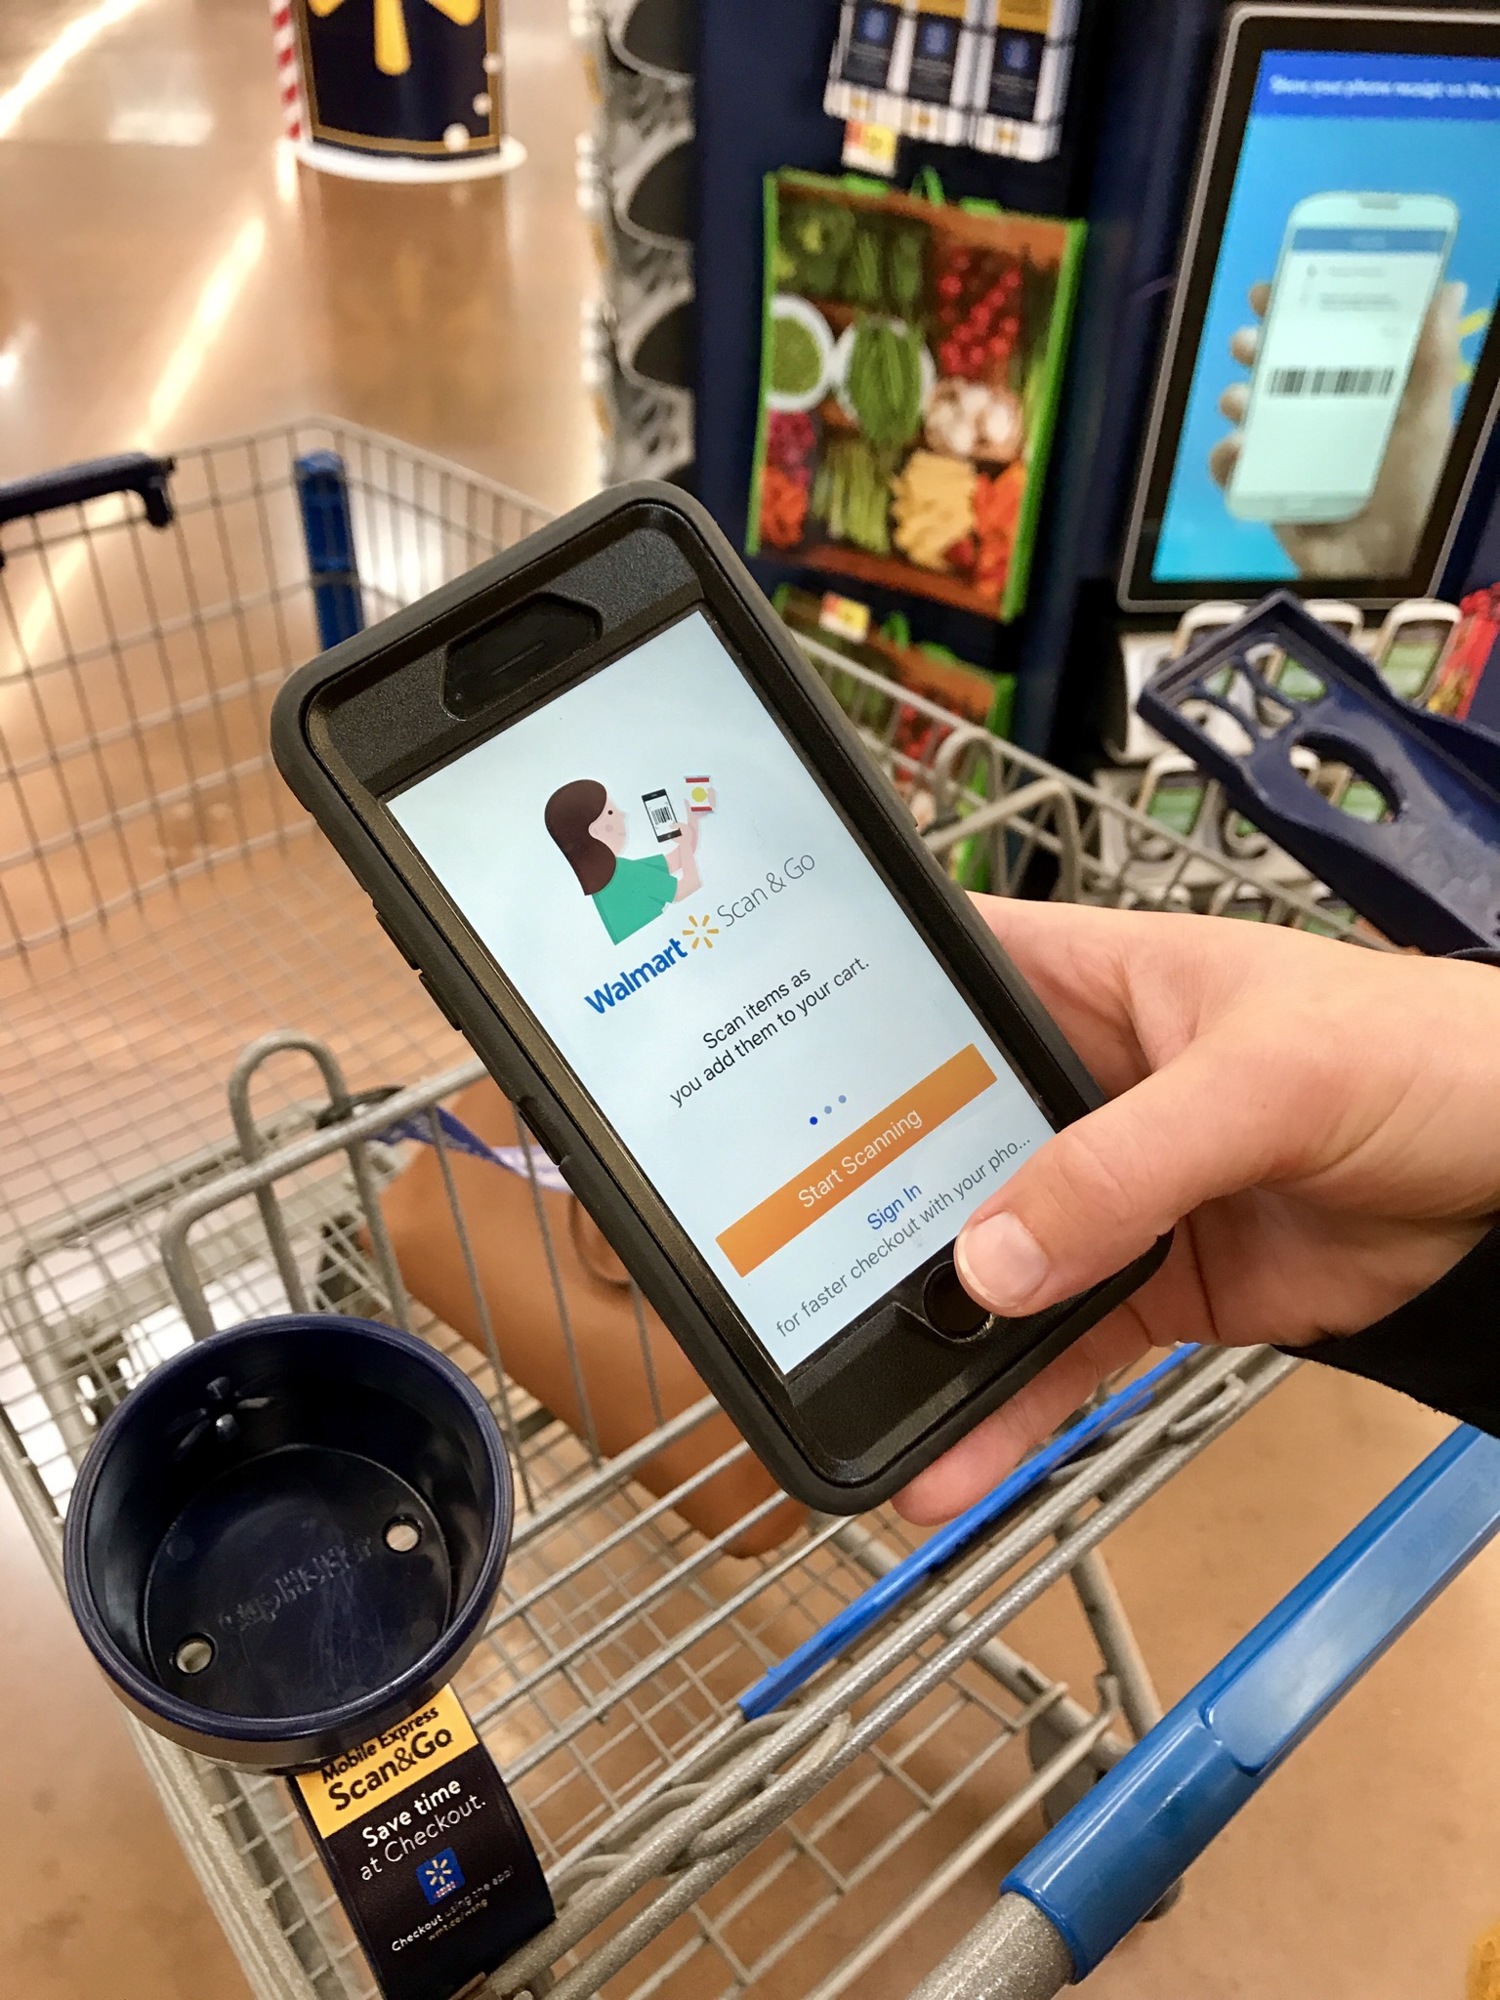 Walmart has rolled out its Mobile Express Scan & Go service at all its Sam's Clubs in Florida and is adding Walmart stores.